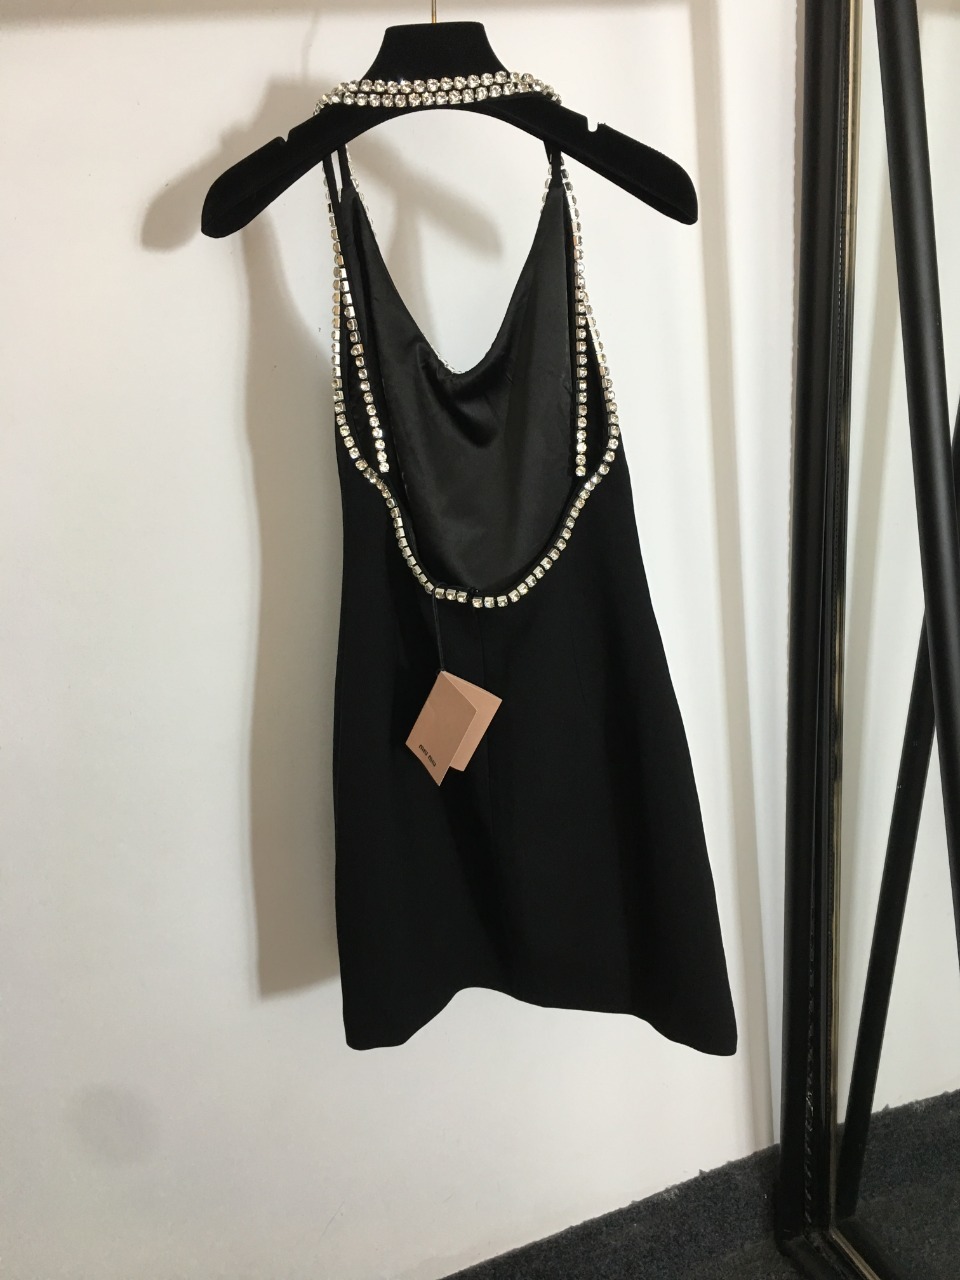 Sexual dress from Neck фото 4